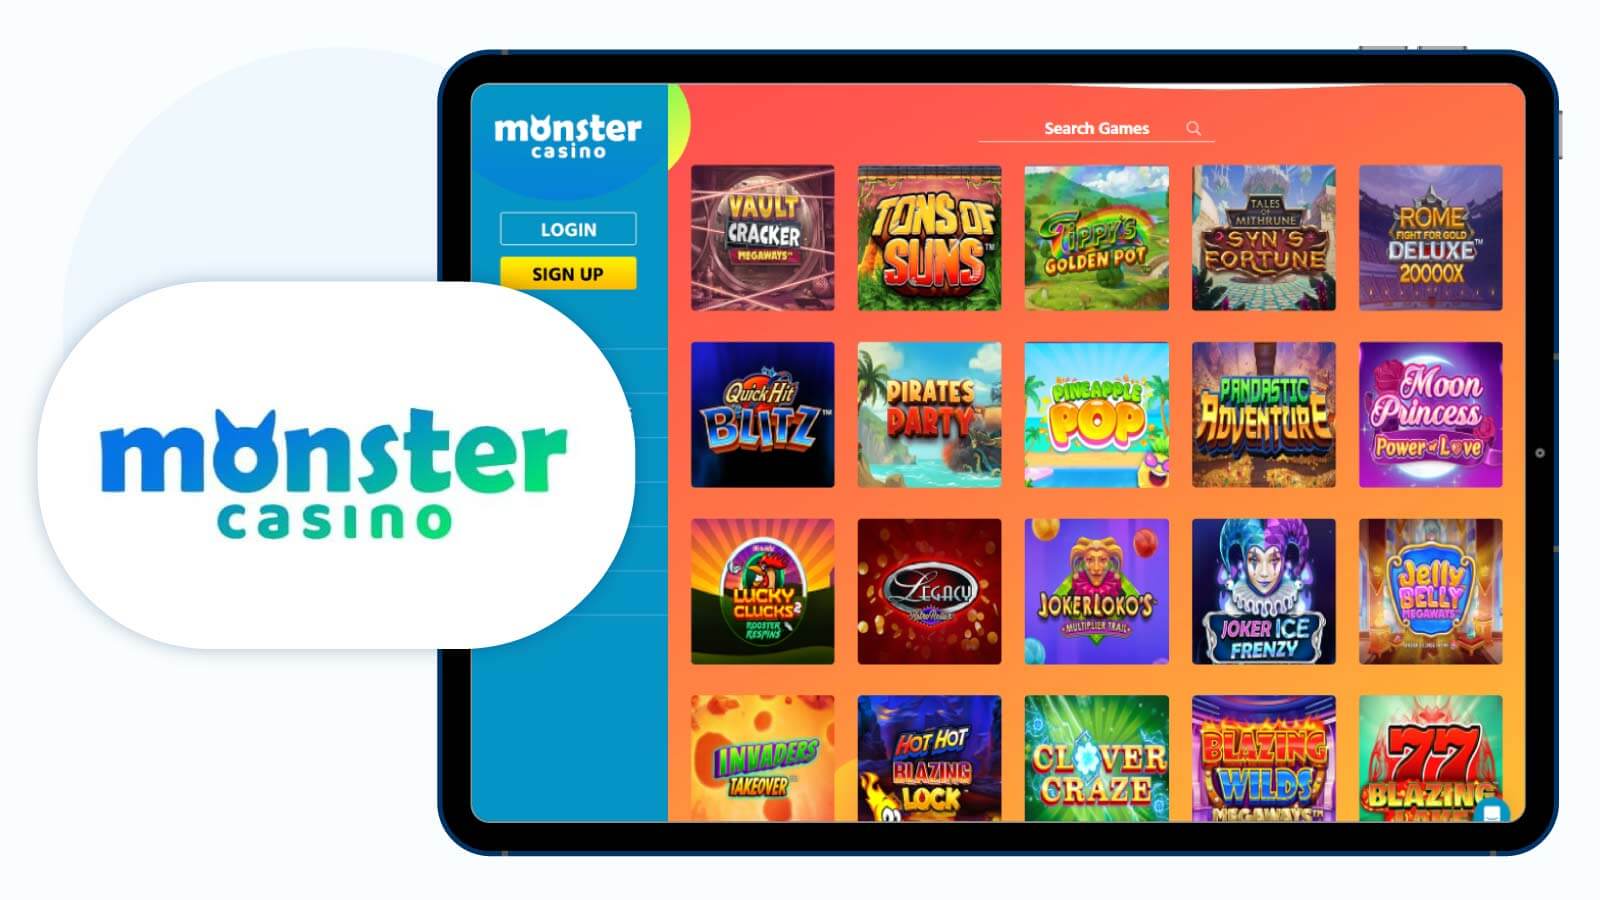 Monster Casino Top RTG Casino in the UK with One-Day Payout